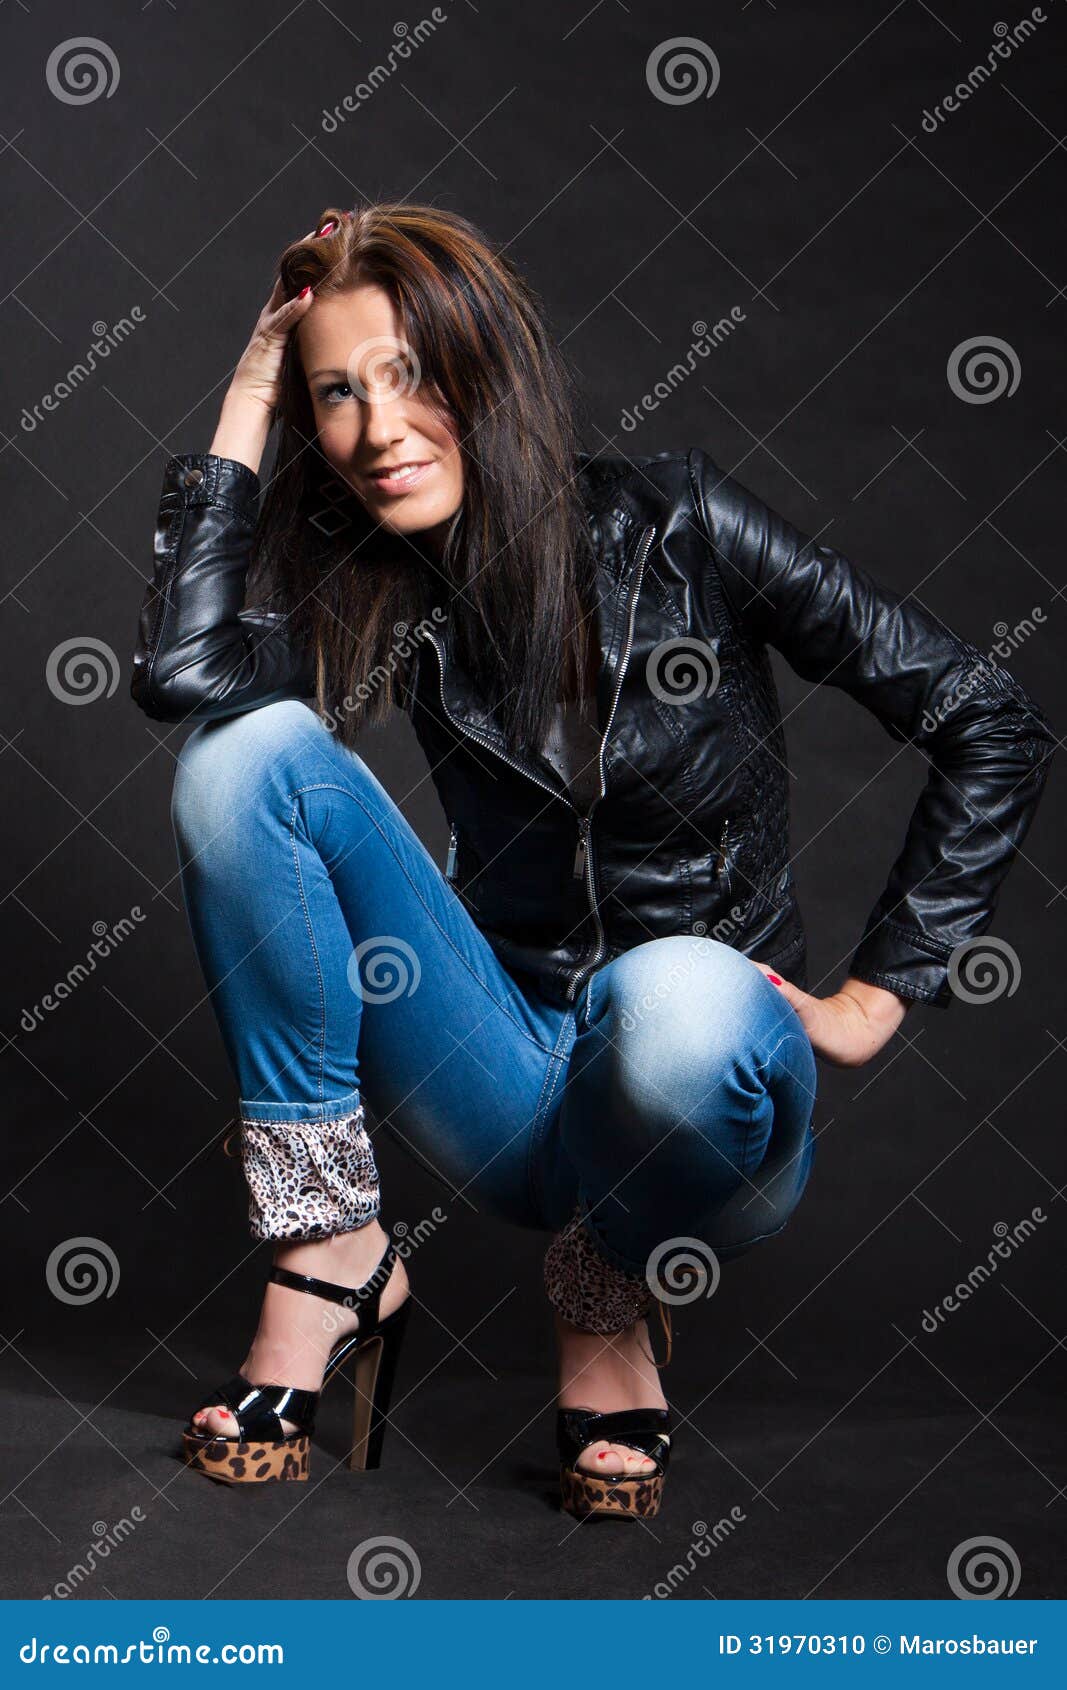 Long-haired Woman In A Leather Jacket Stock Photo - Image: 31970310